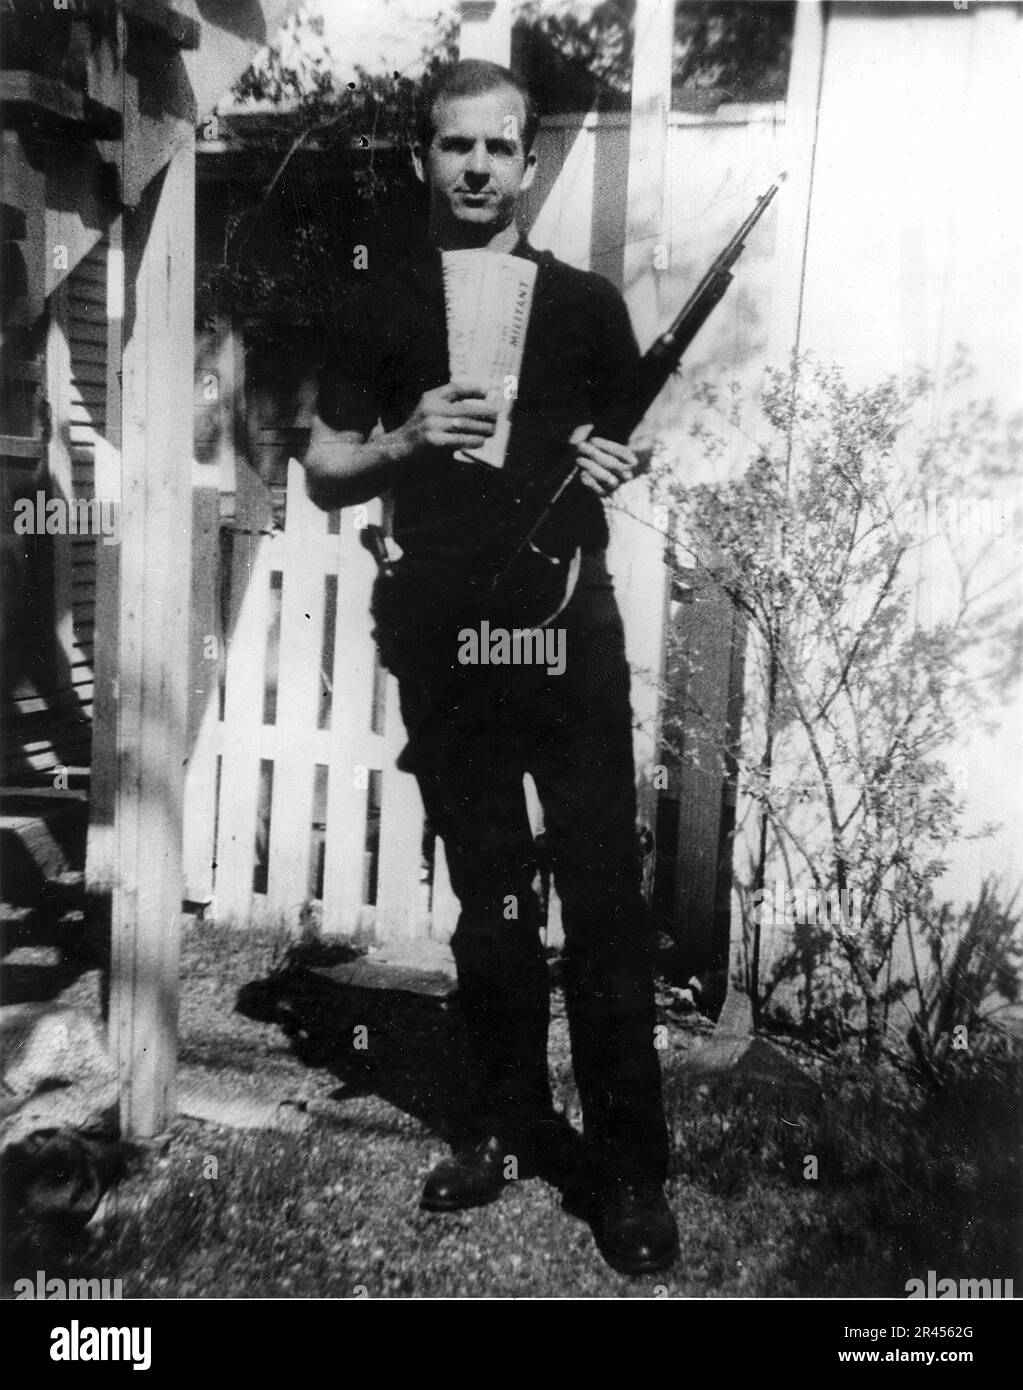 'Backyard photo' of Lee Harvey Oswald, assassin of U.S. President John F. Kennedy, holding two Marxist newspapers, The Militant and The Worker, and a Carcano rifle, with markings matching those on the rifle found in the Book Depository after the assassination. Stock Photo